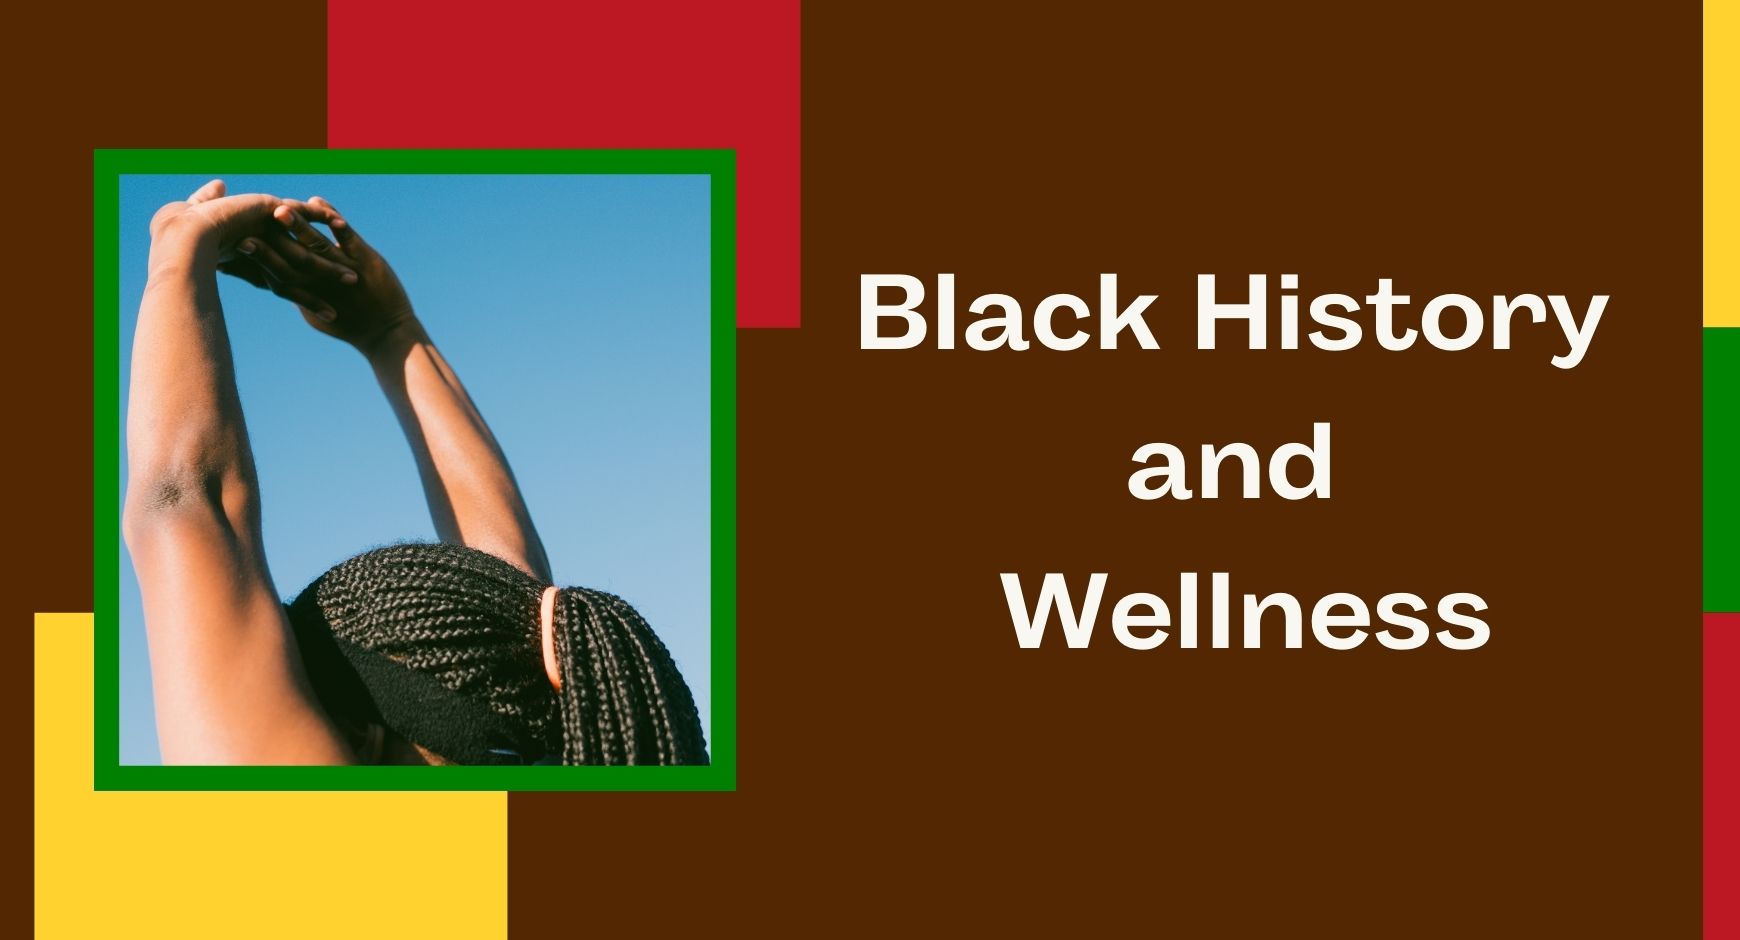 A picture of a woman with long black braids and her arms stretched upward next to words that read "Black History and Wellness". There are red, green, and yellow block designs in the background. 